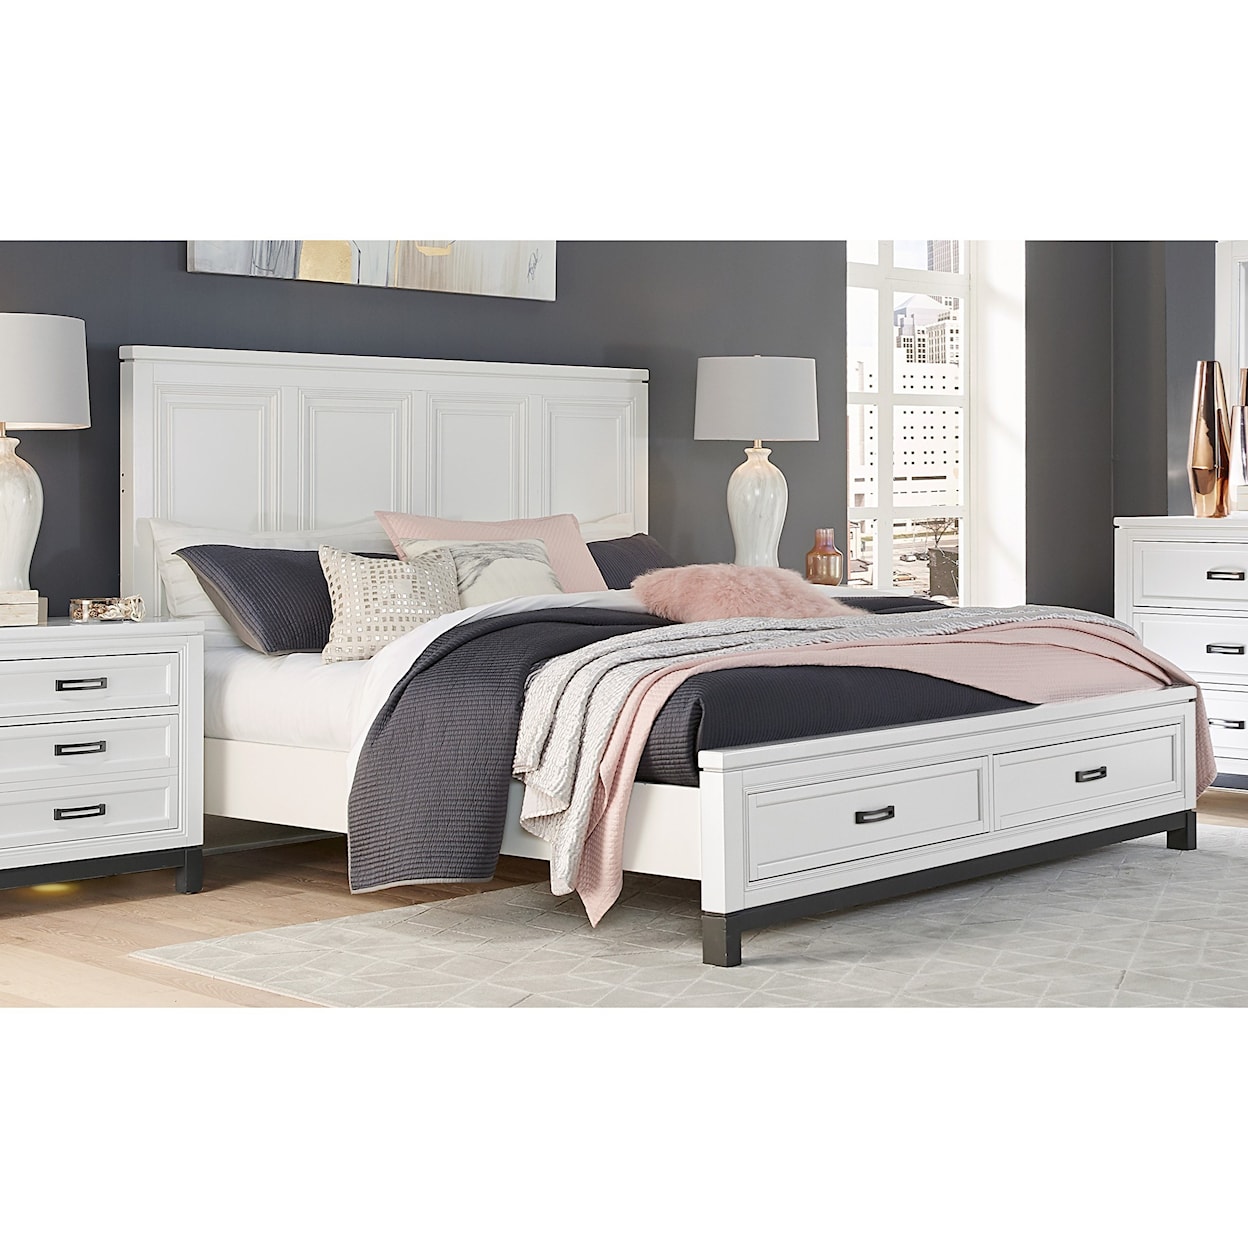 Aspenhome Hyde Park Cal King Painted Panel Storage Bed